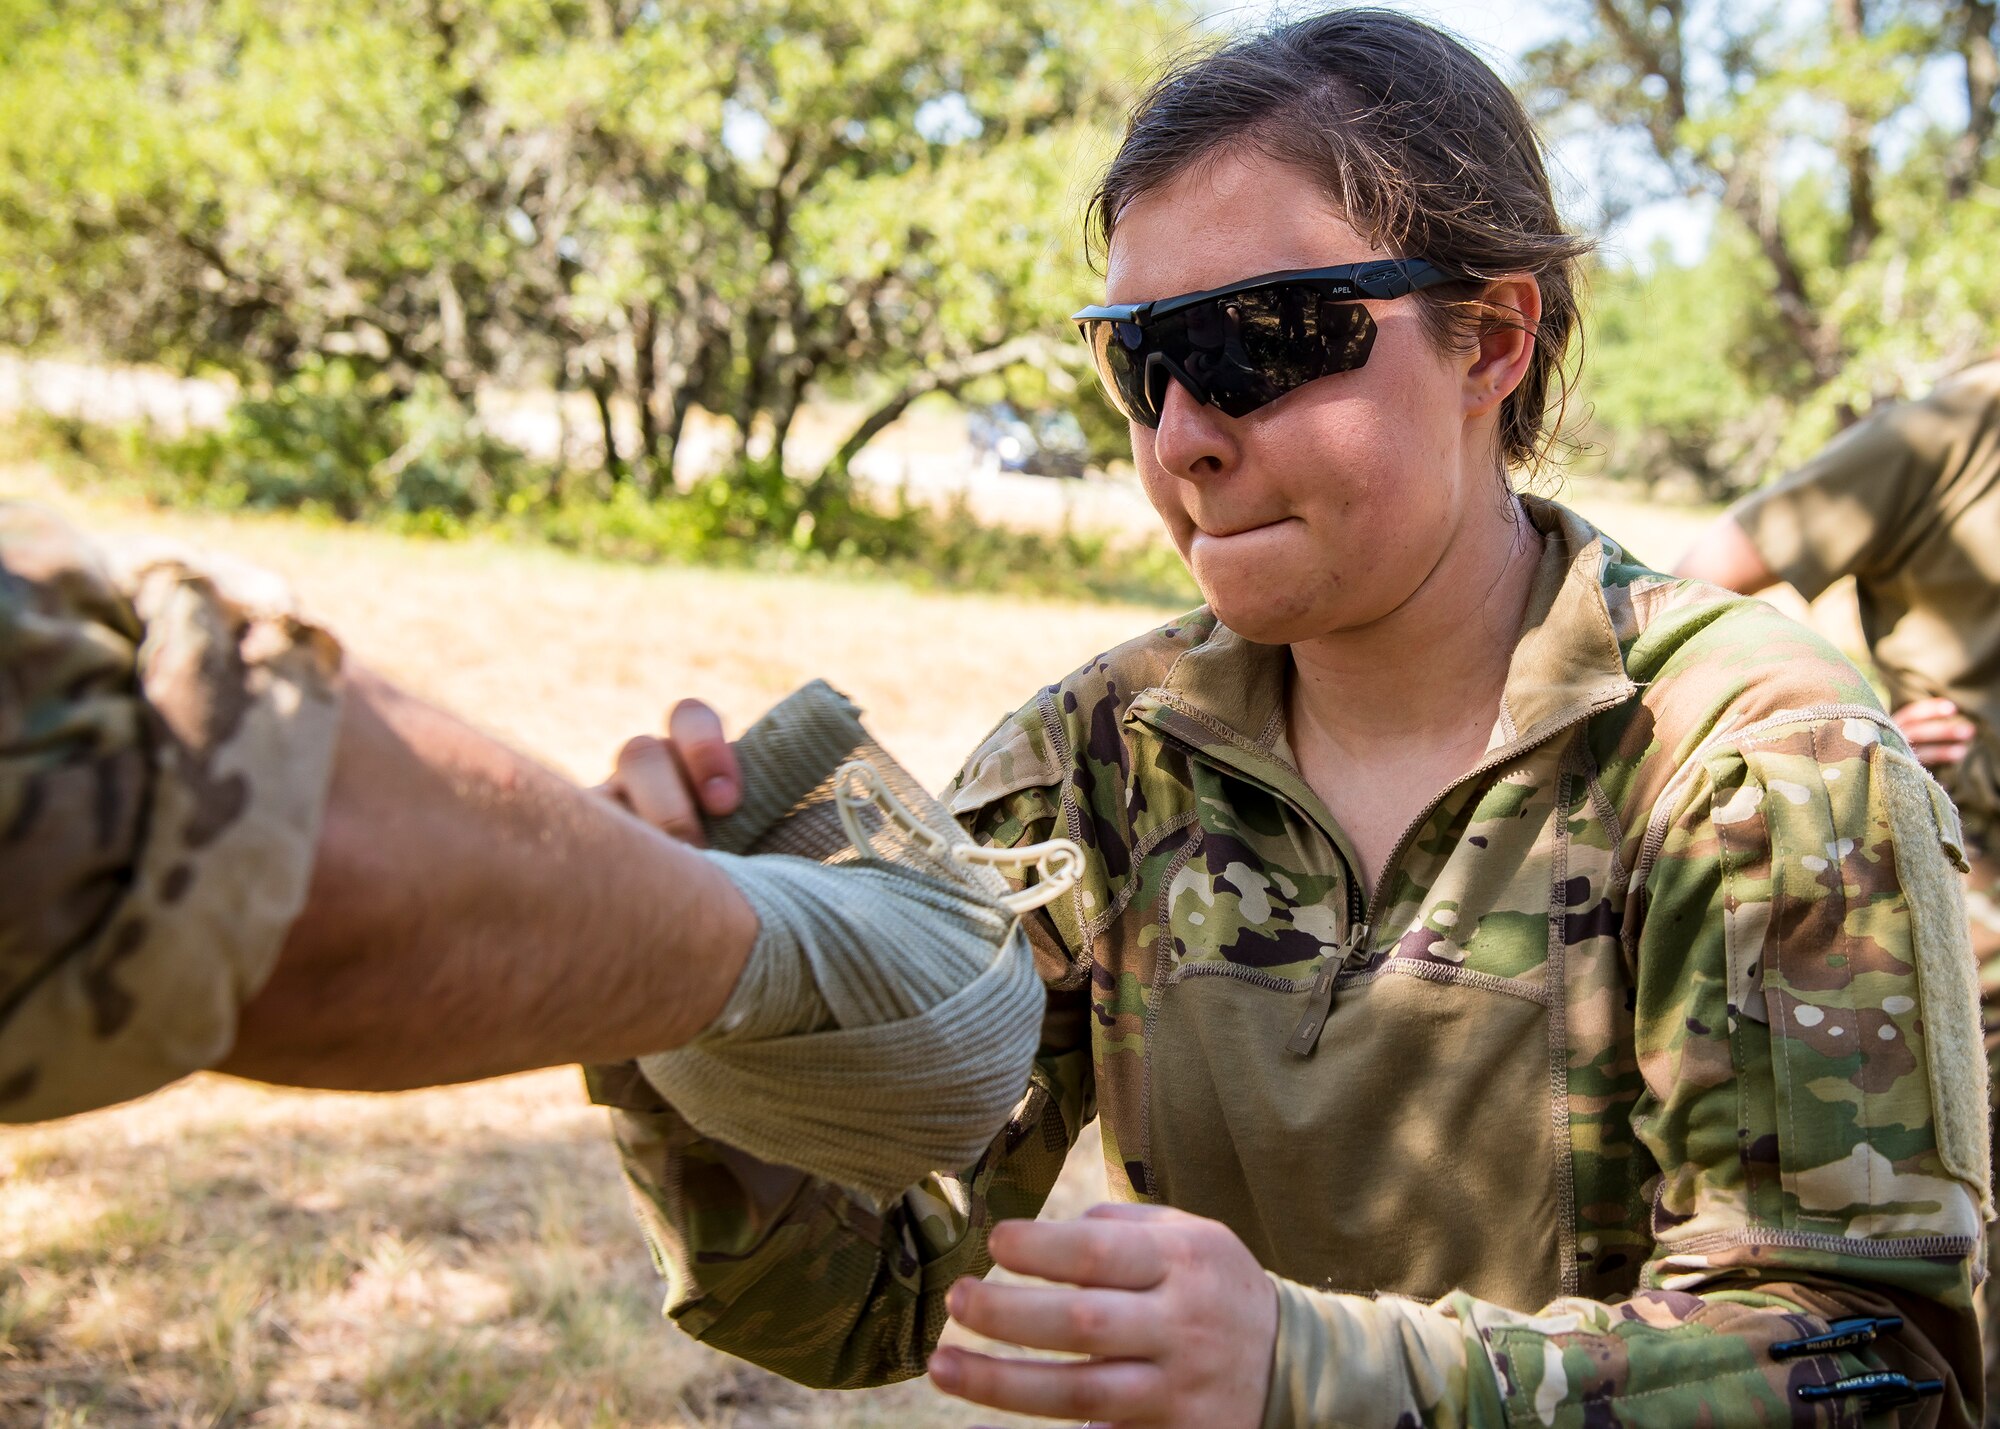 Airman 1st Class Whitley Eyestone, 3d Weather Squadron weather forecaster, applies a tunicate to a simulated victim during a certification field exercise (CFX), July 31, 2019, at Camp Bowie Training Center, Texas. The CFX was designed to evaluate the squadron’s overall tactical ability and readiness to provide the U.S. Army with full spectrum environmental support to the Joint Task Force (JTF) fight. The CFX immersed Airmen into all the aspects of what could come with a deployment such as self-aid buddy care. (U.S. Air Force photo by Airman 1st Class Eugene Oliver)